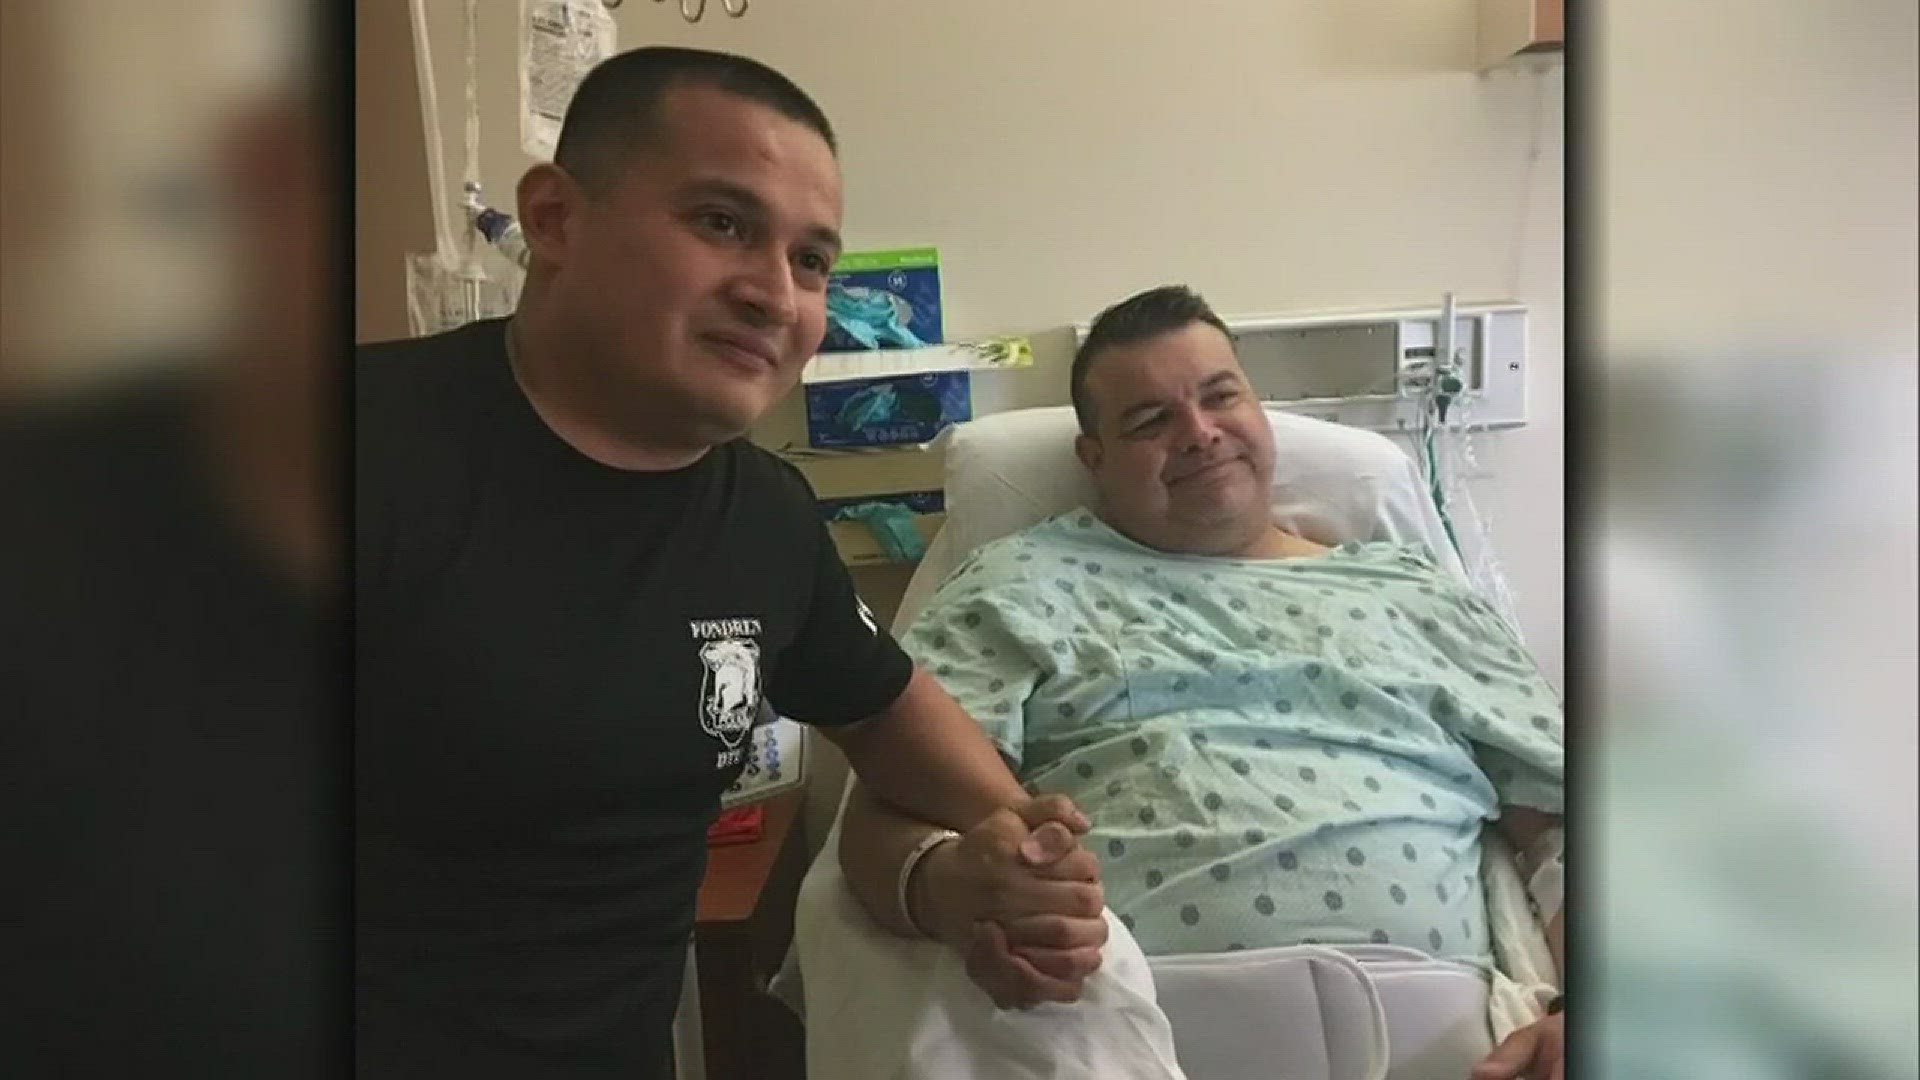 Houston police officer Ronny Cortez was caught  on camera moving his toes, which is a huge milestone in his recovery after being seriously injured in a shootout earlier this year.